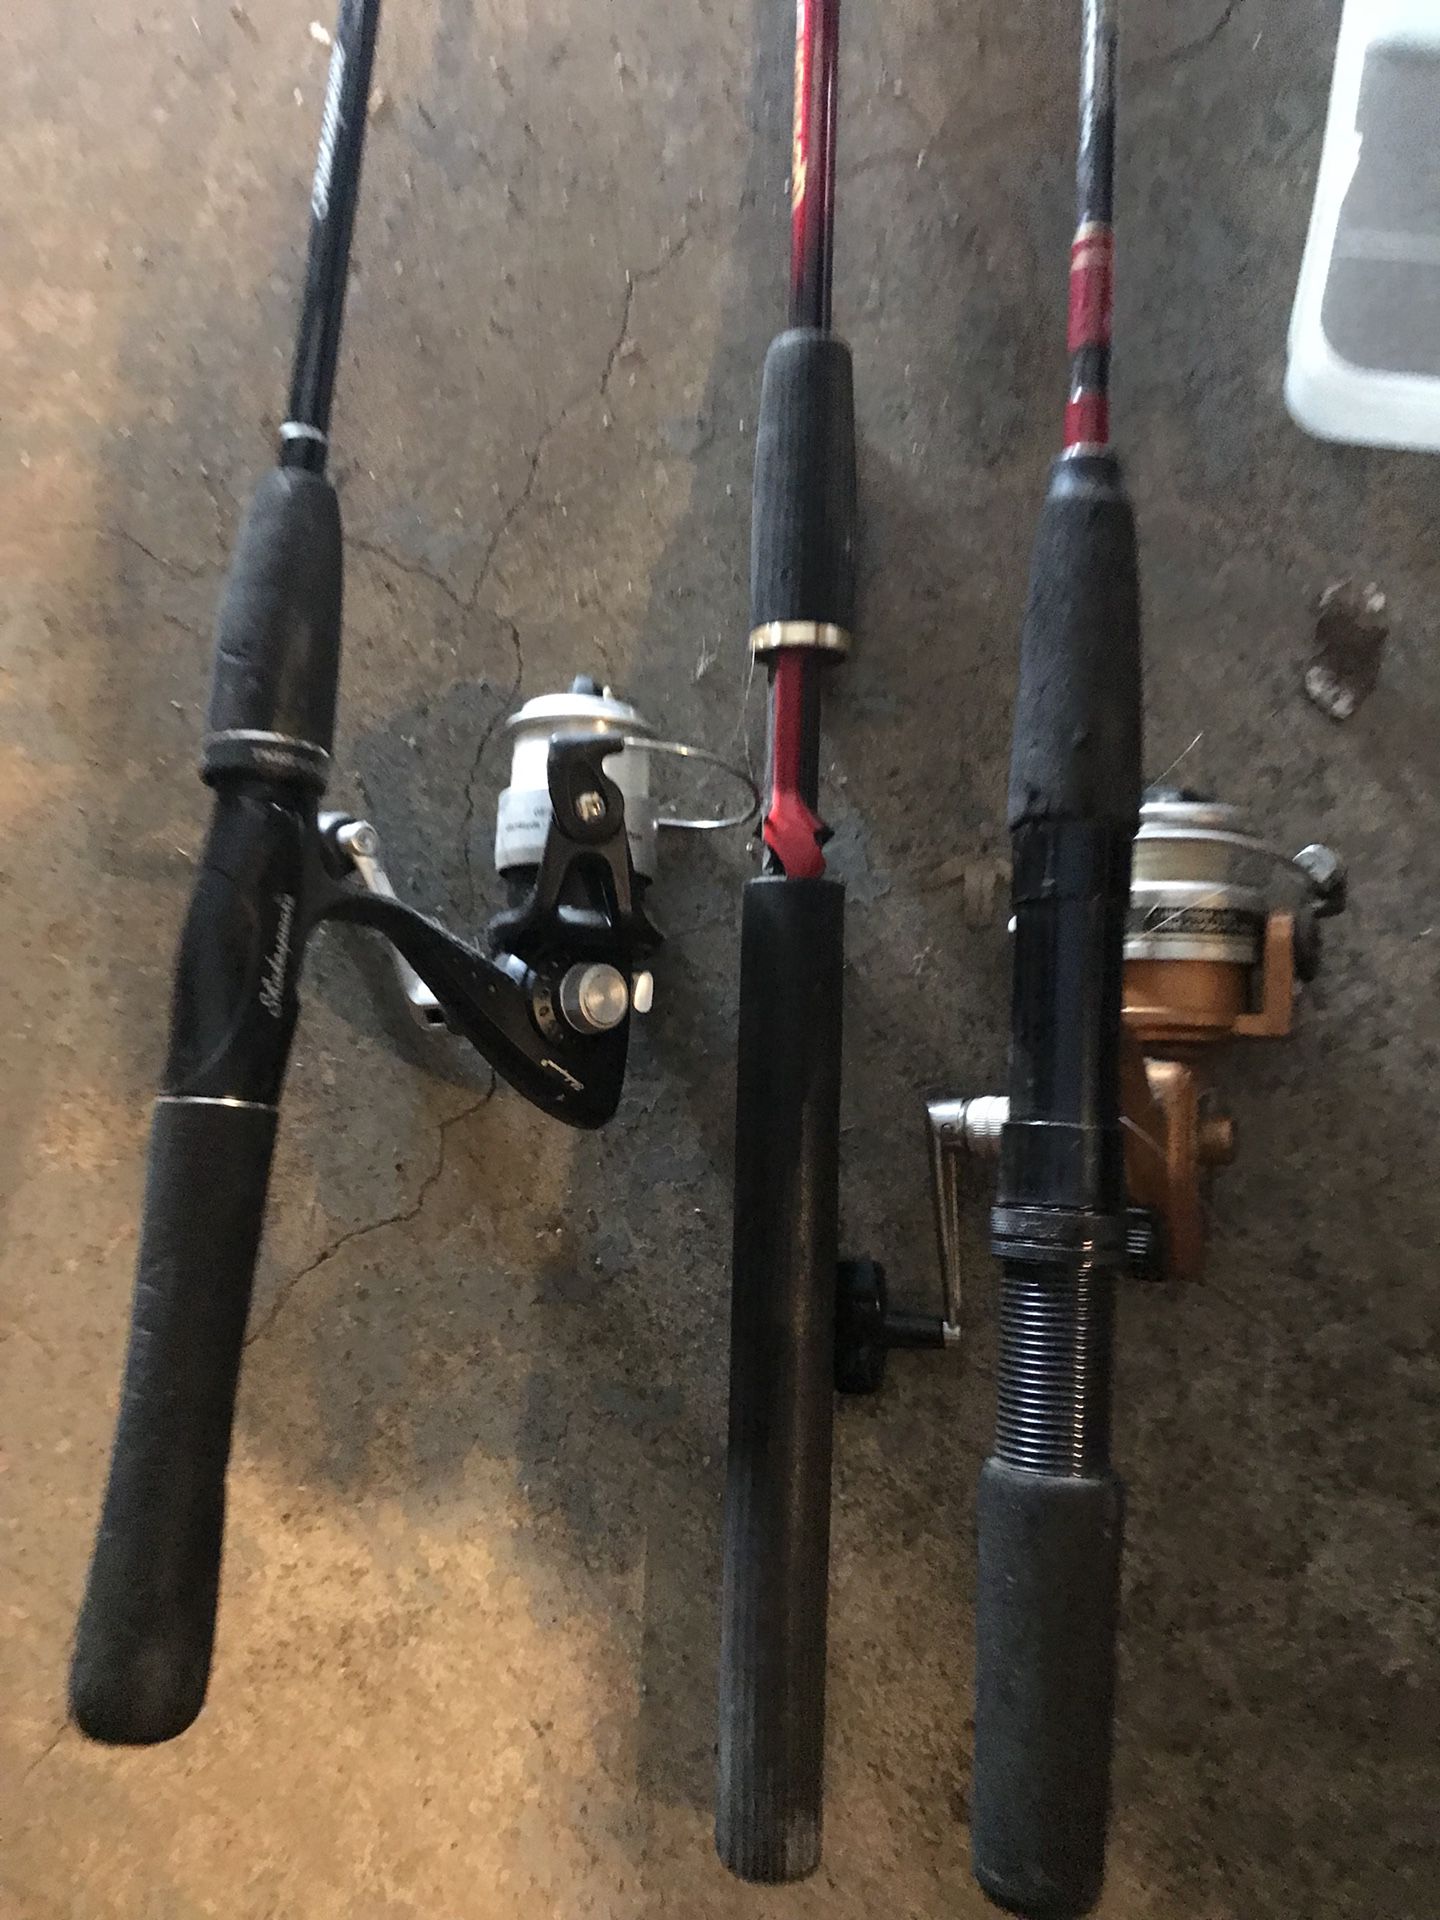 Fishing poles in reel and tackle box